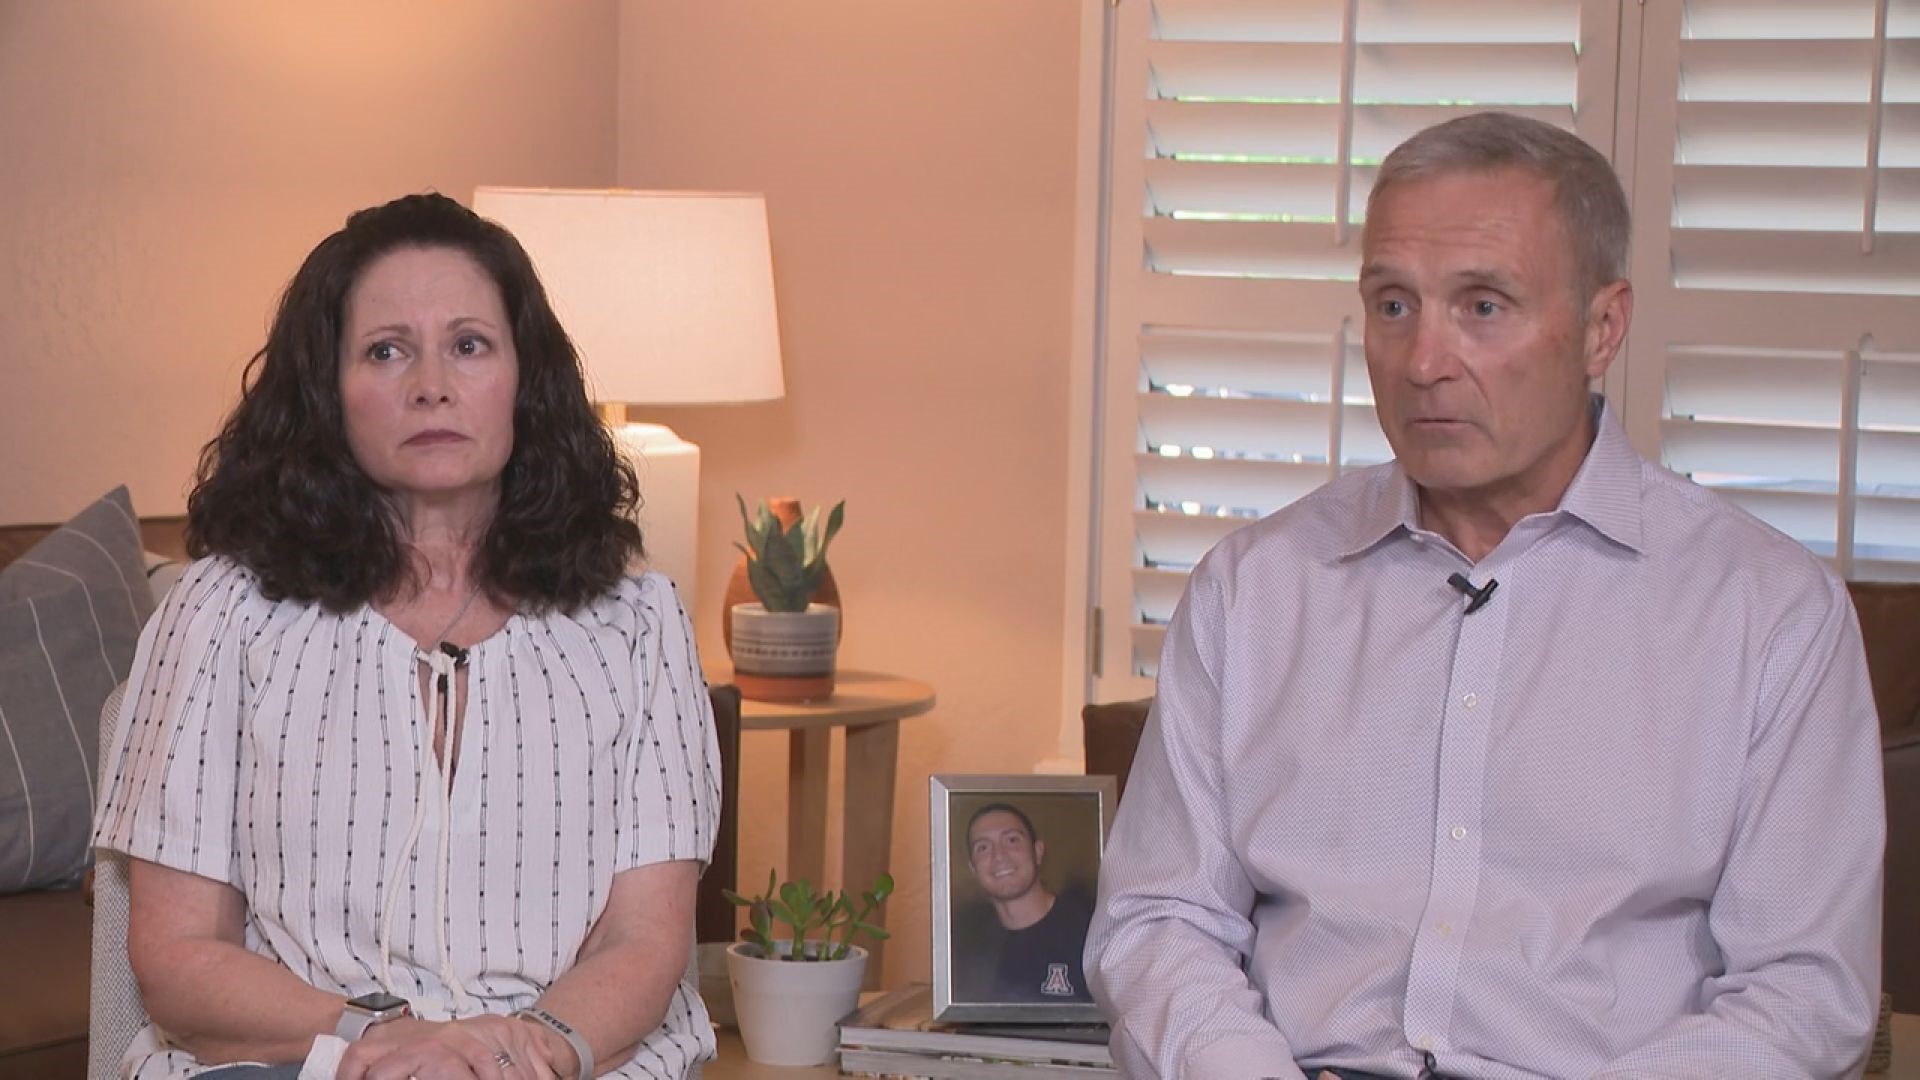 Tom and Caren Teves, whose son Alex was killed in the 2012 shooting, started a campaign to give less attention to mass shooters.